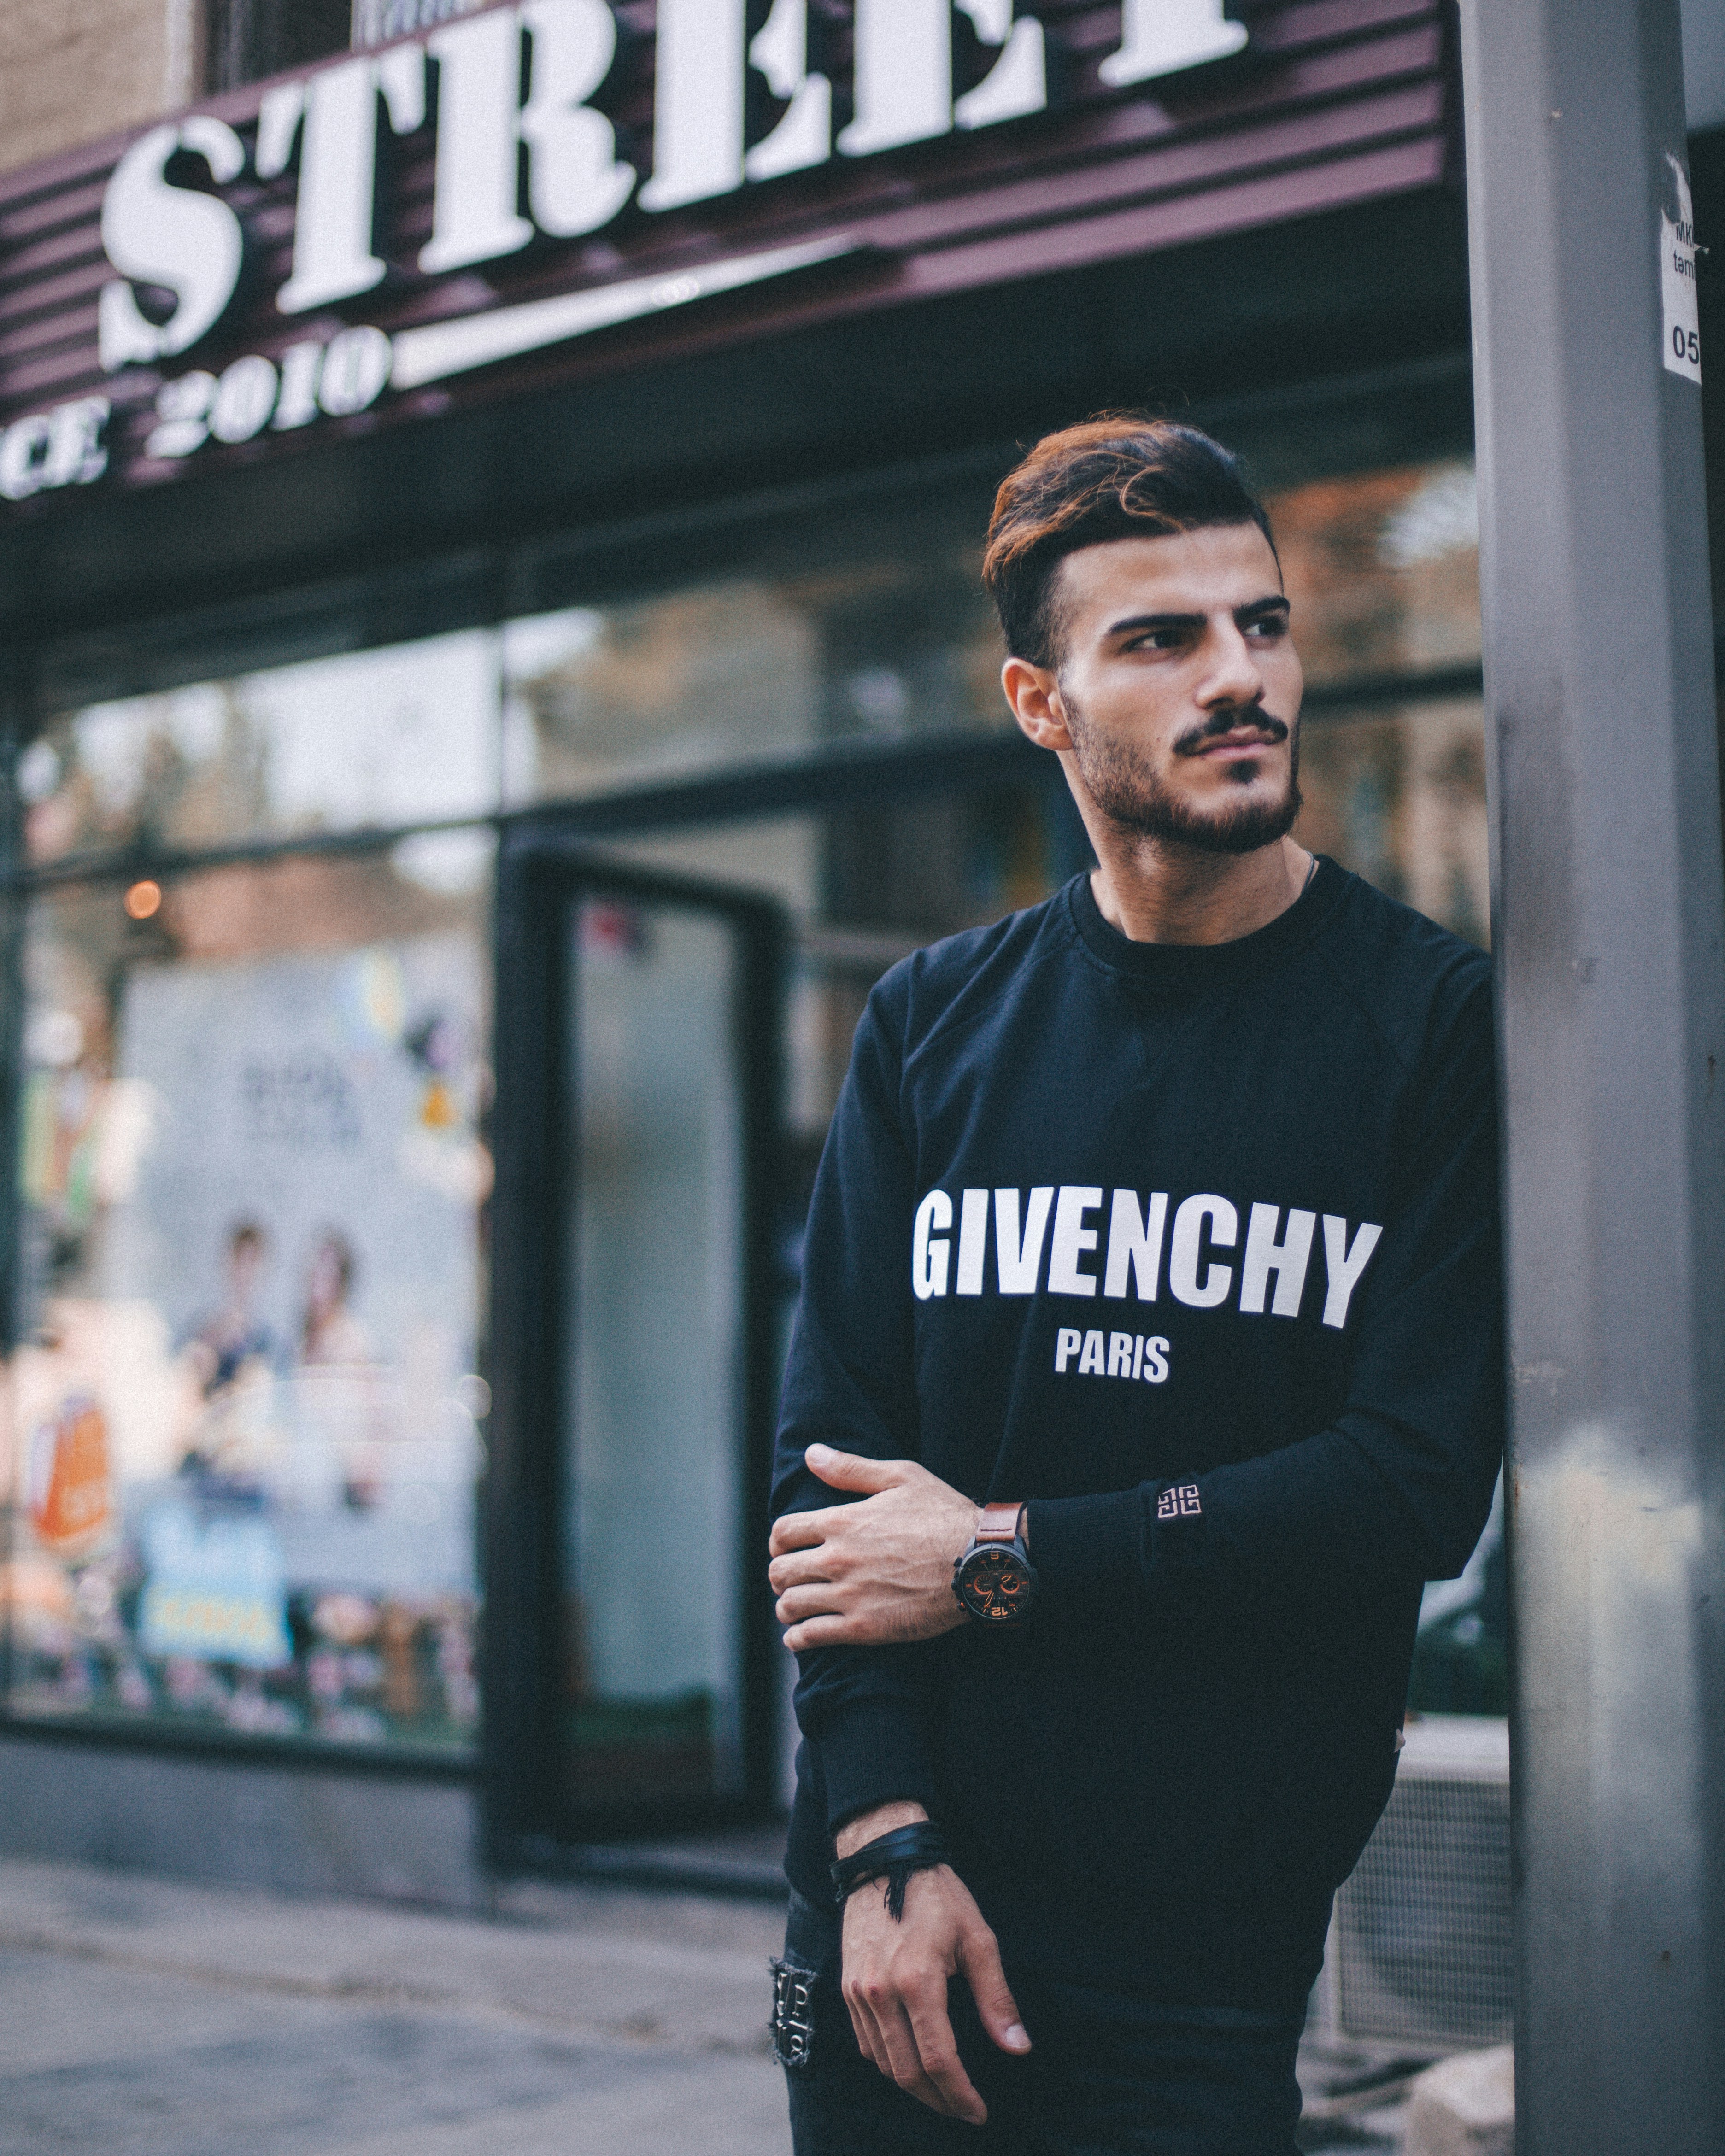 great photo recipe,how to photograph mehdizadeh; man in black givenchy sweatshirt standing beside of post in front of strek store during daytime shallow focus photography